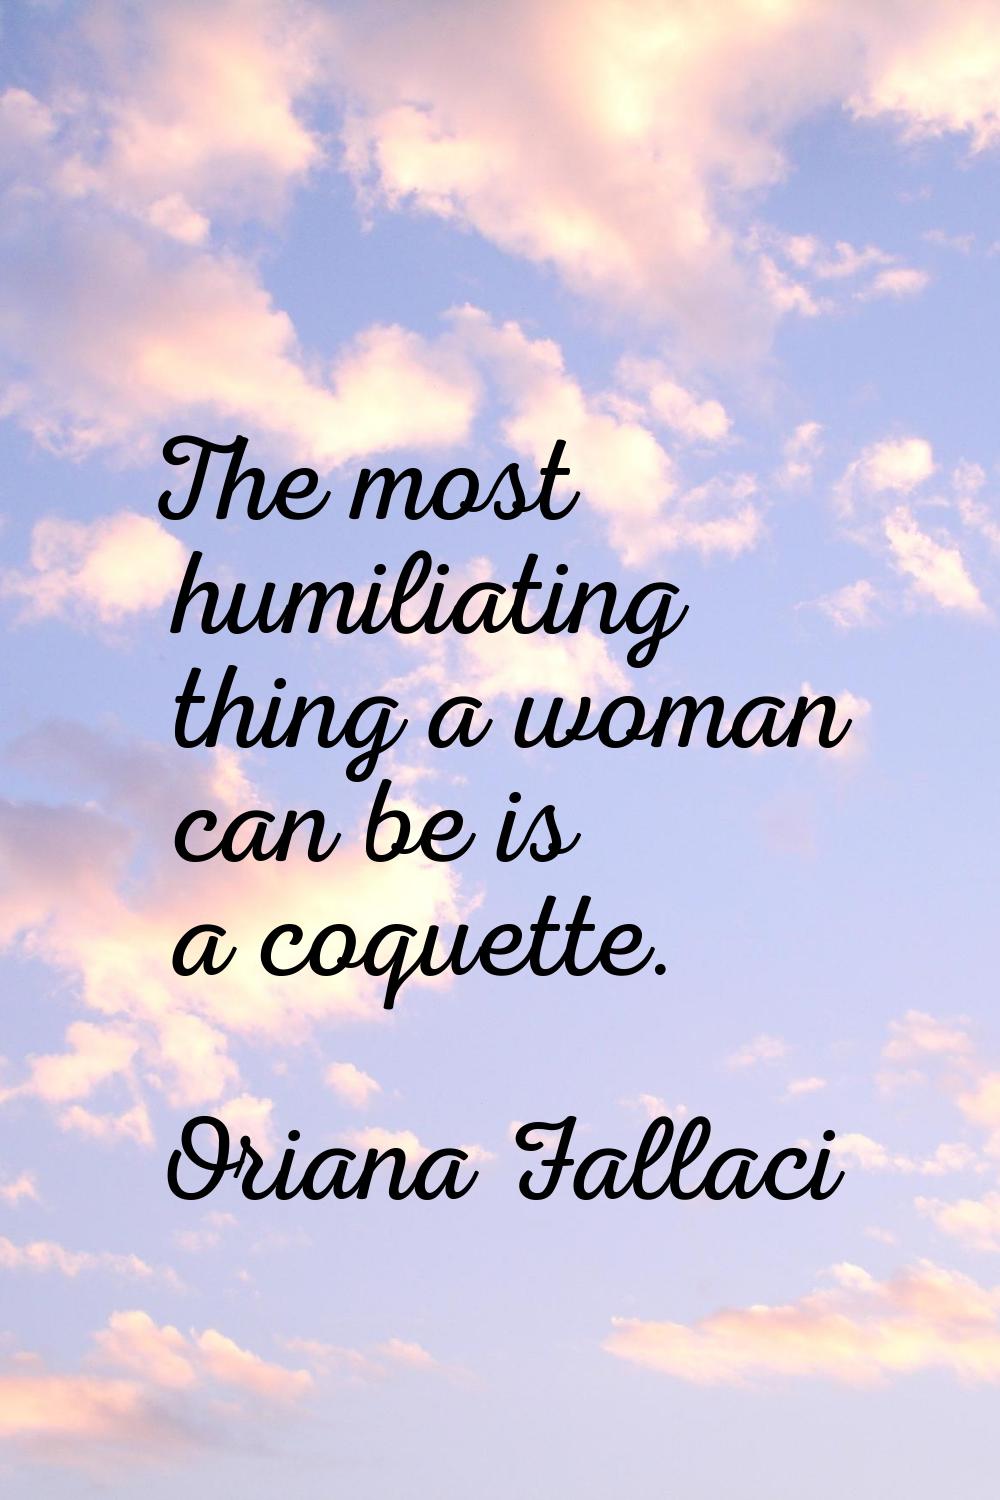 The most humiliating thing a woman can be is a coquette.